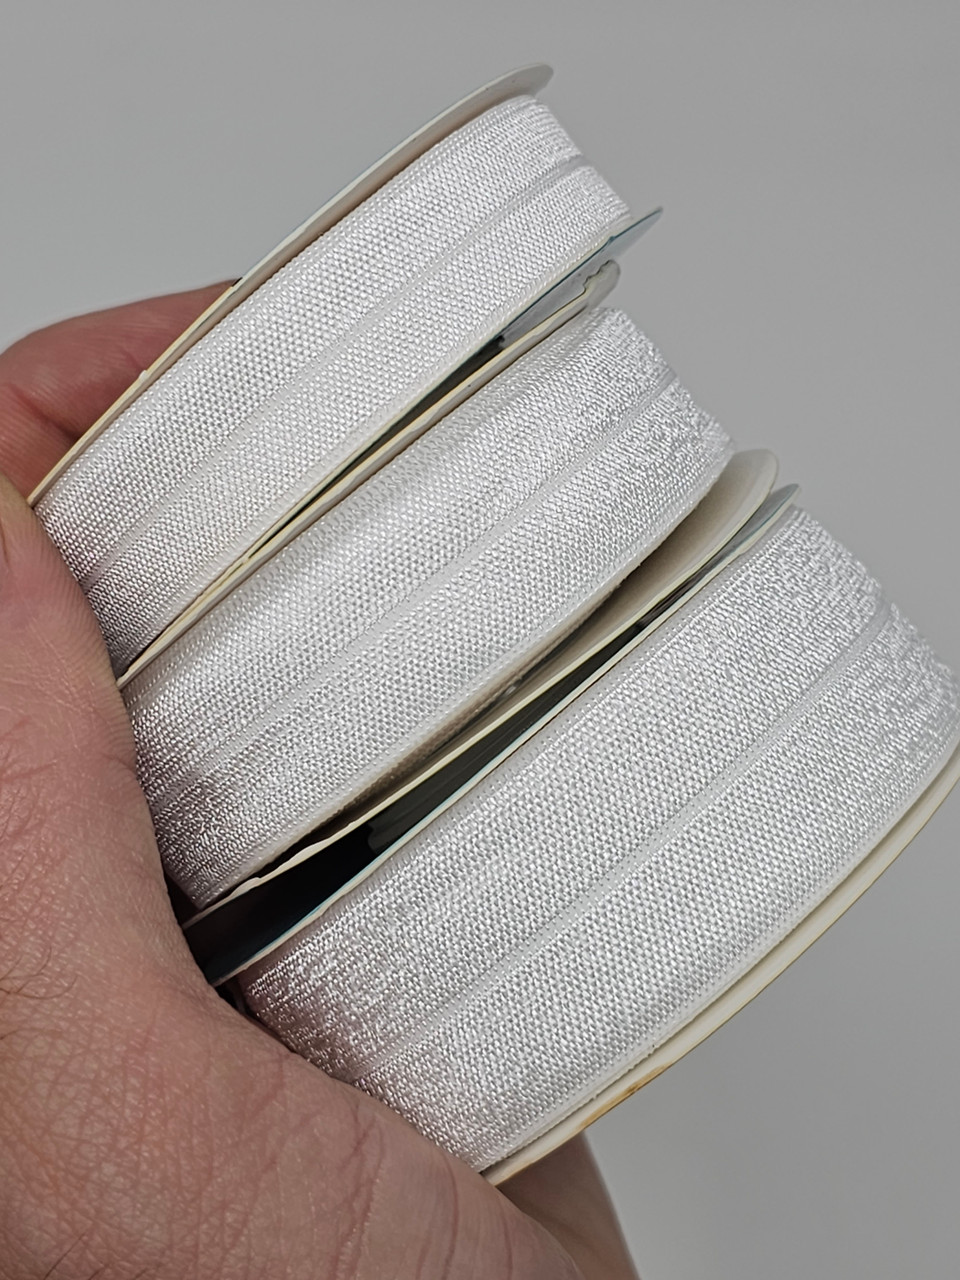 Wide Fold Over Elastic - 1 5/8 inch or 40mm - 3 Yards